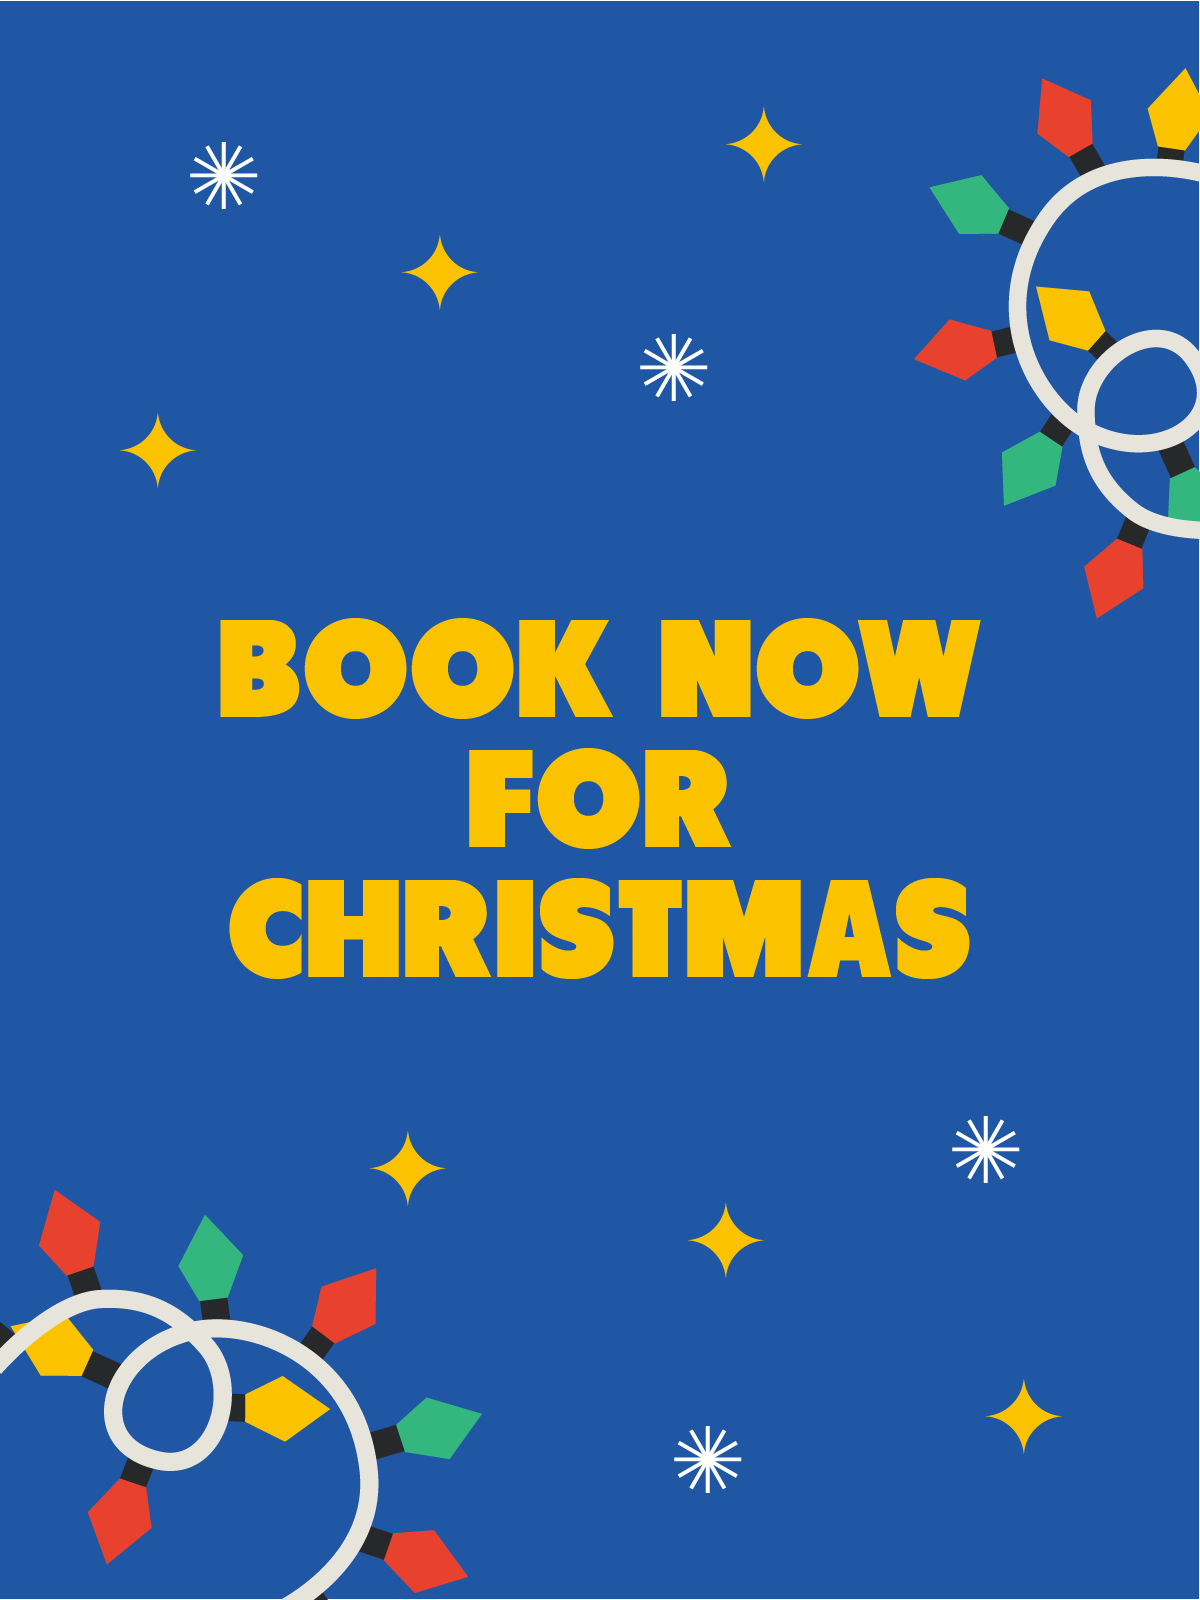 Book now for Christmas